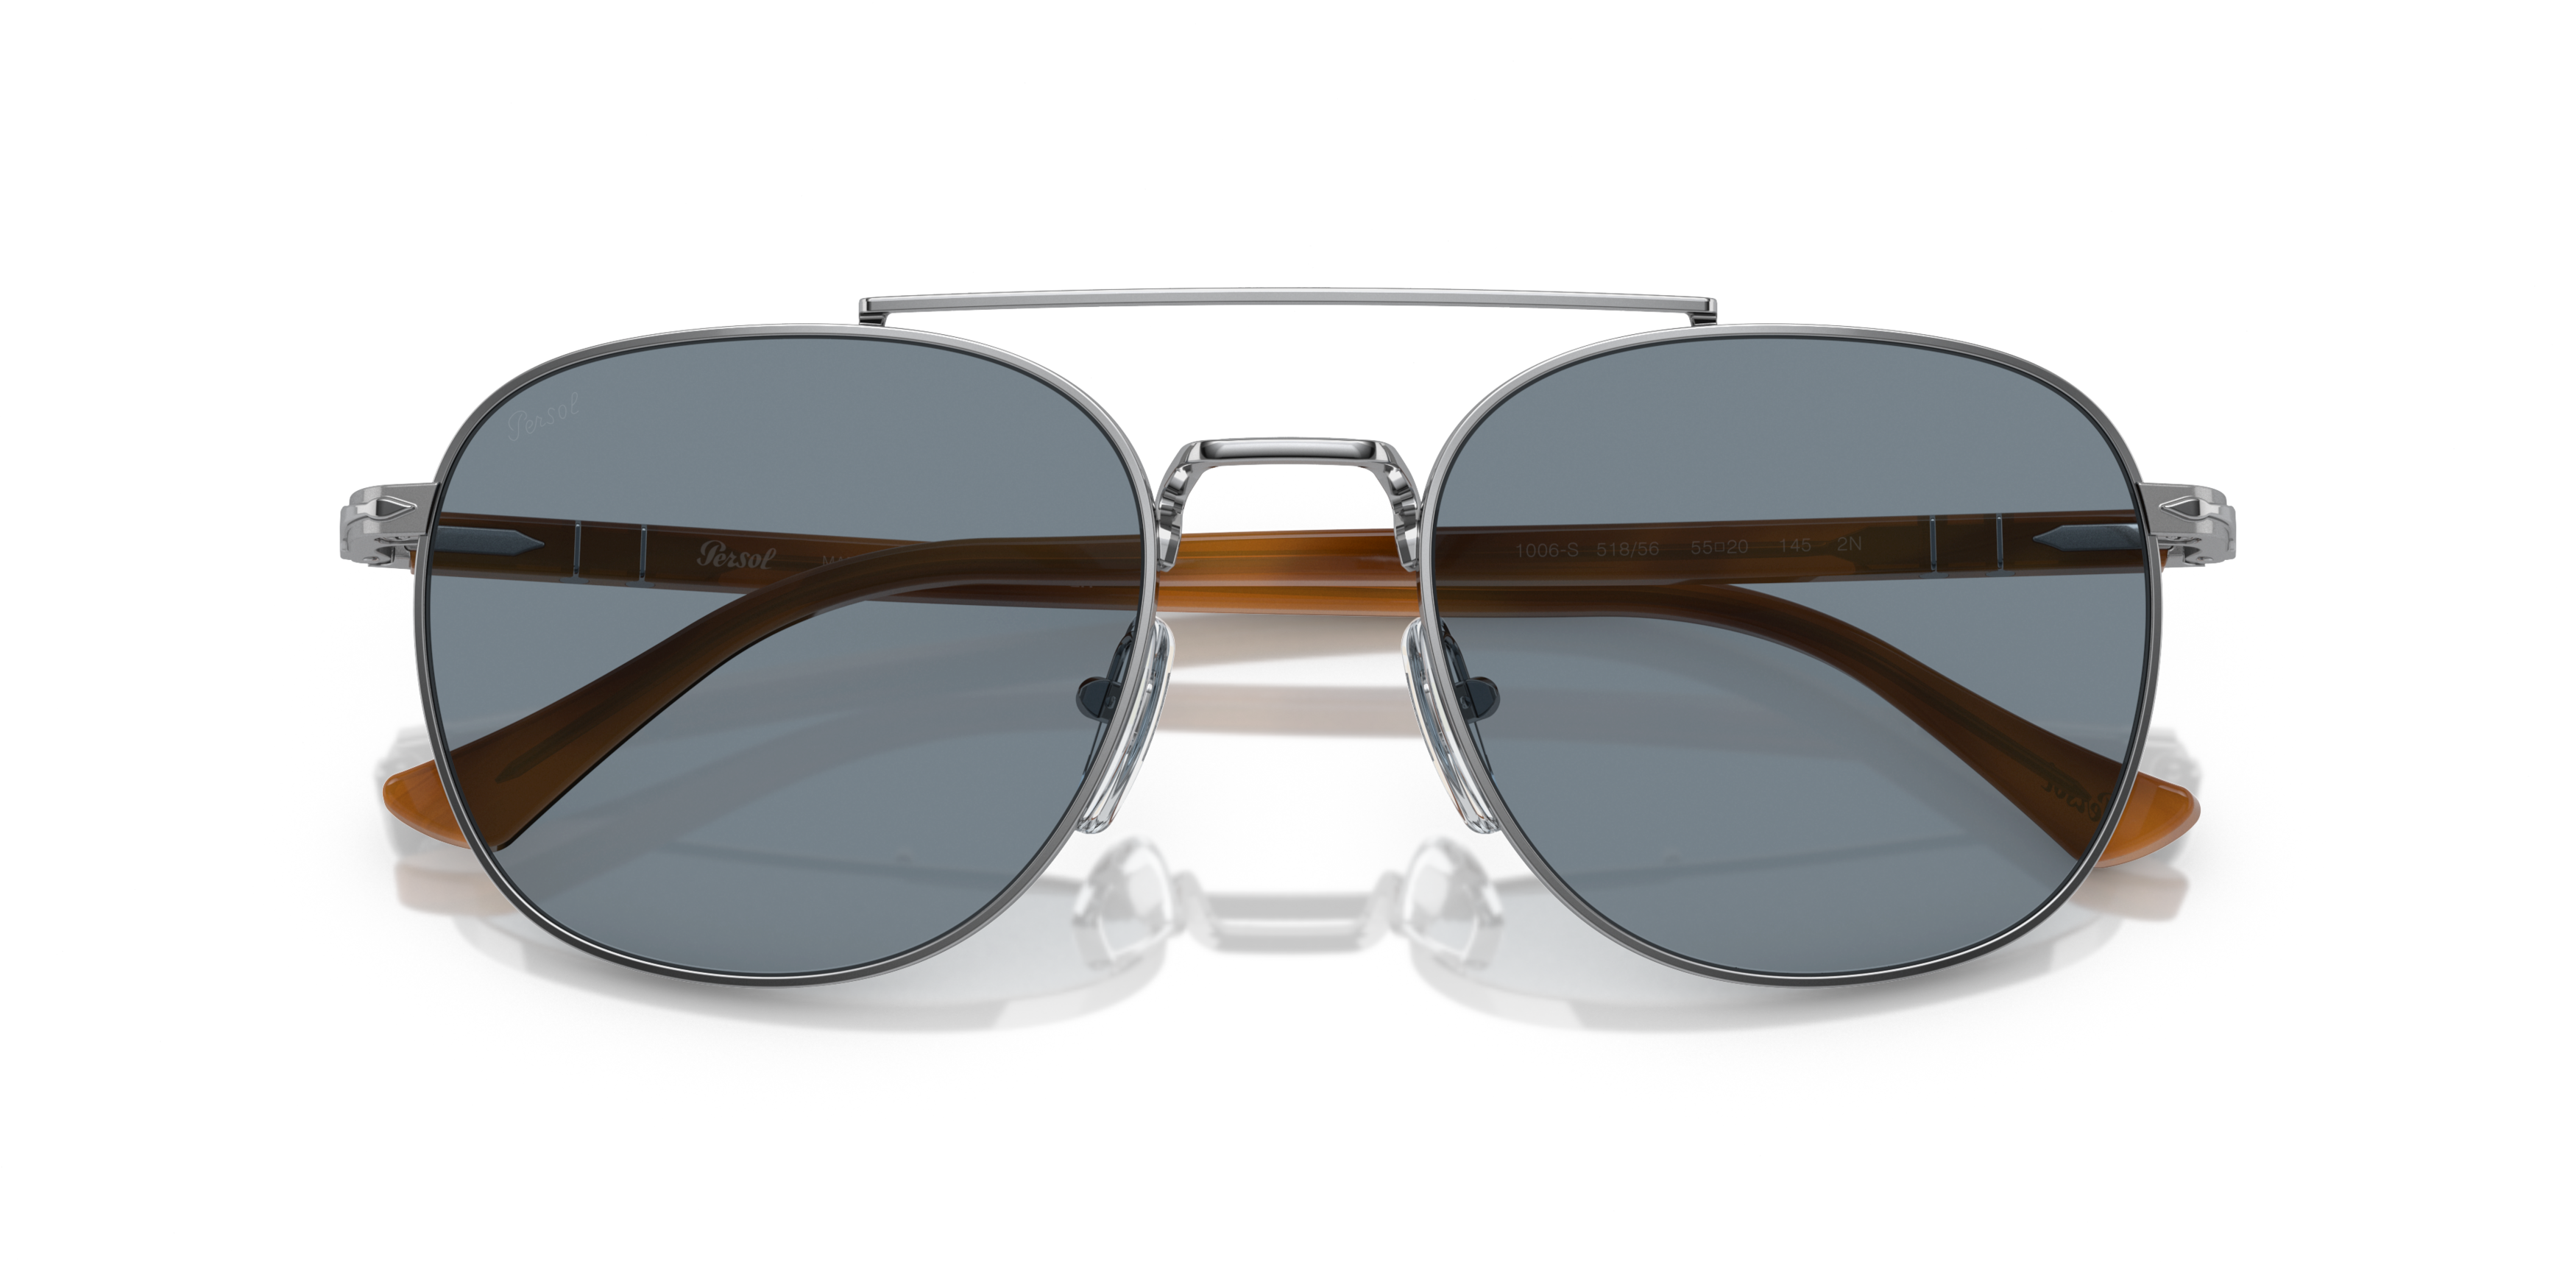 [products.image.folded] PERSOL PO1006S 518/56